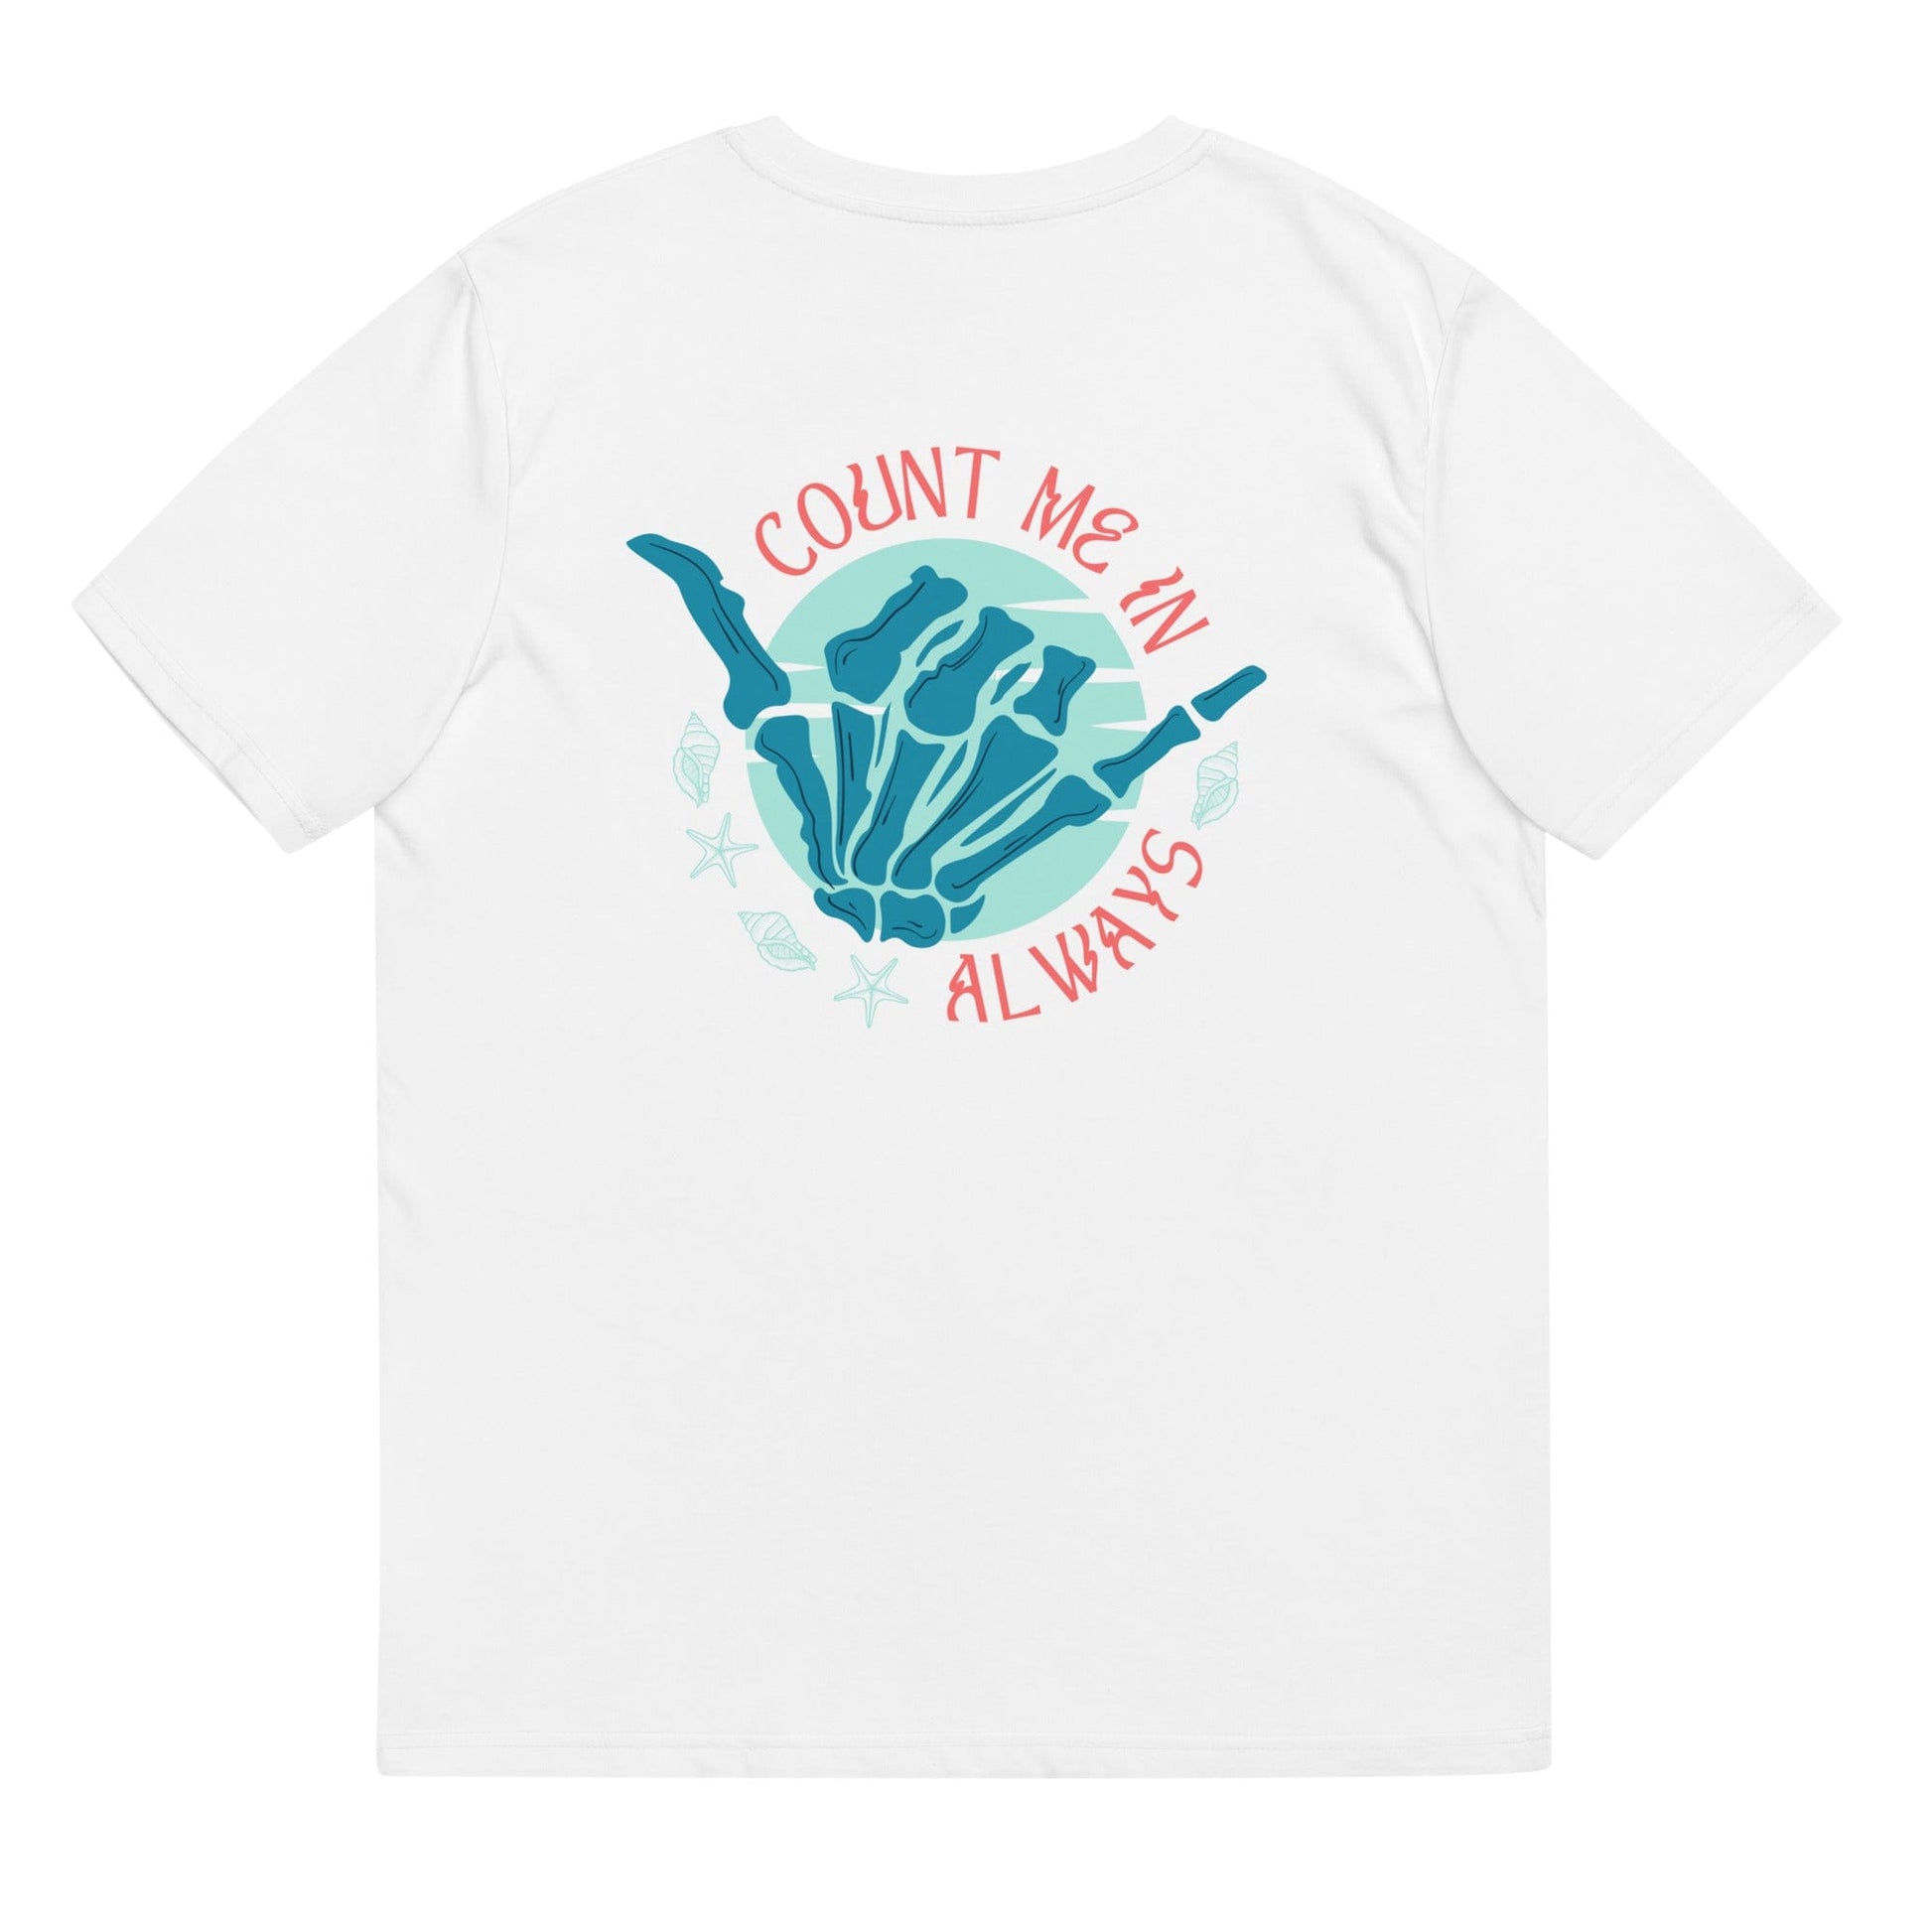 Local Summer Collective Count Me In Unisex Organic Cotton T-Shirt